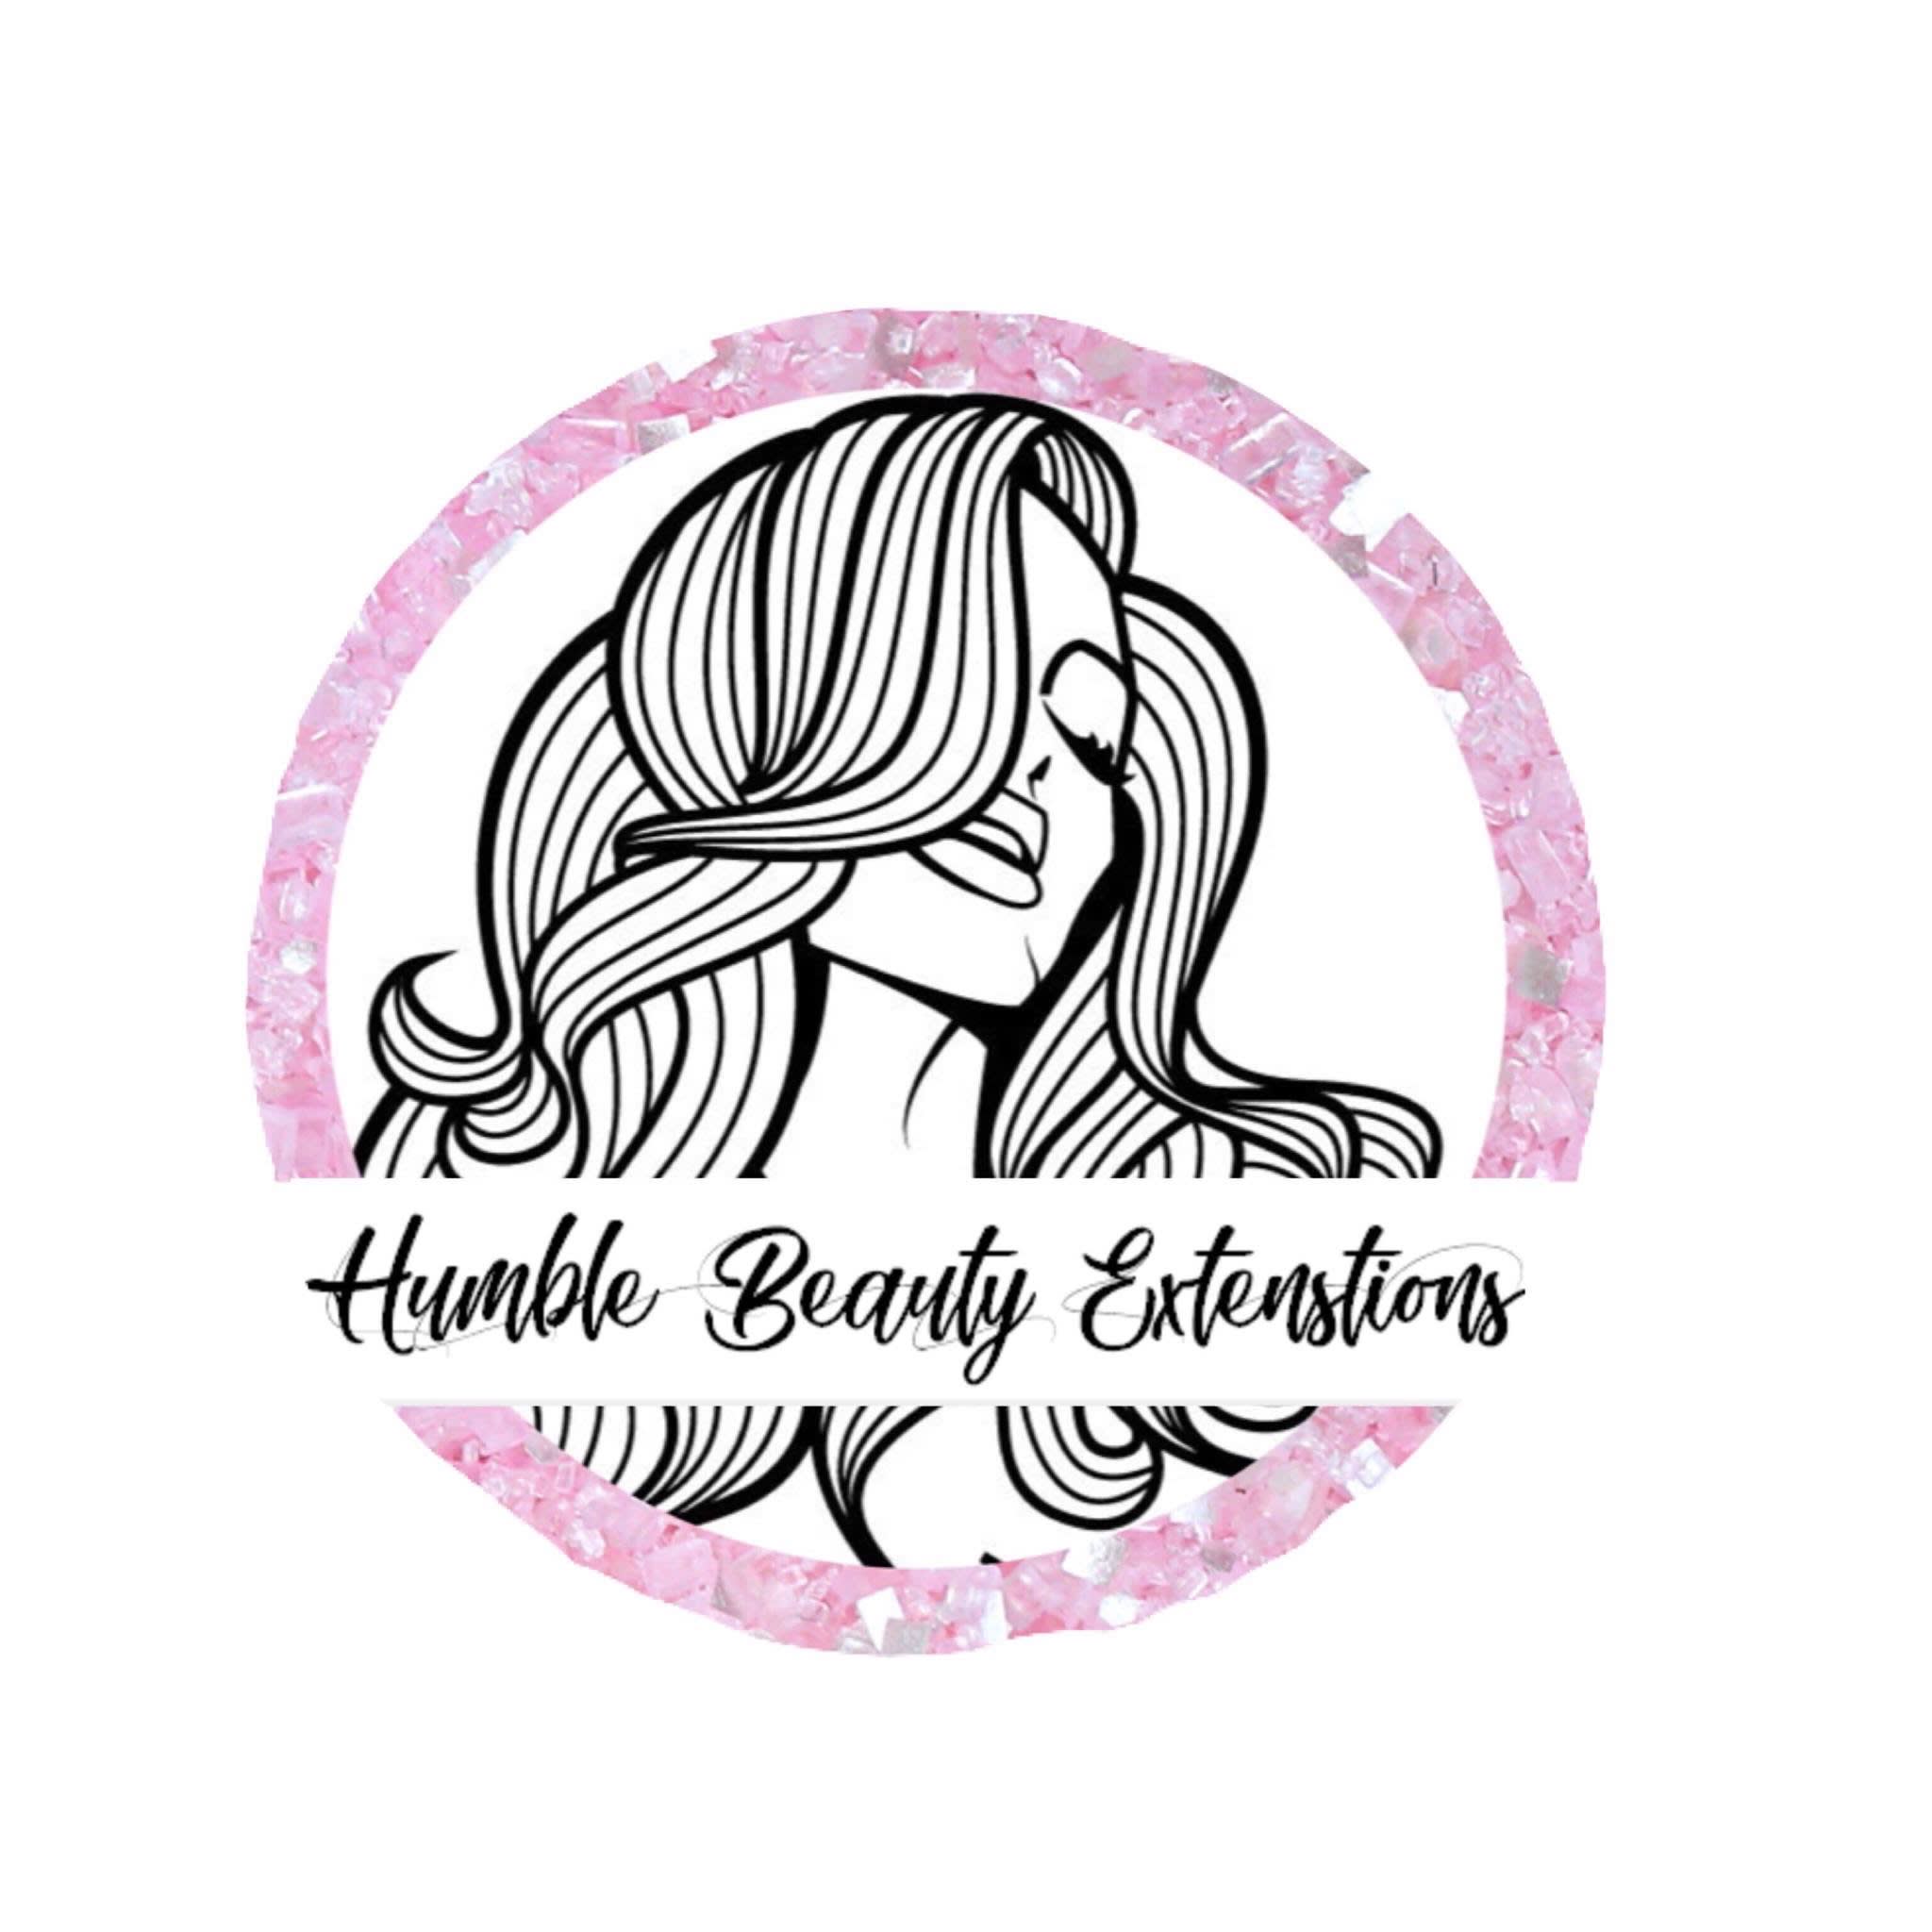 Humble Beauty Extensions